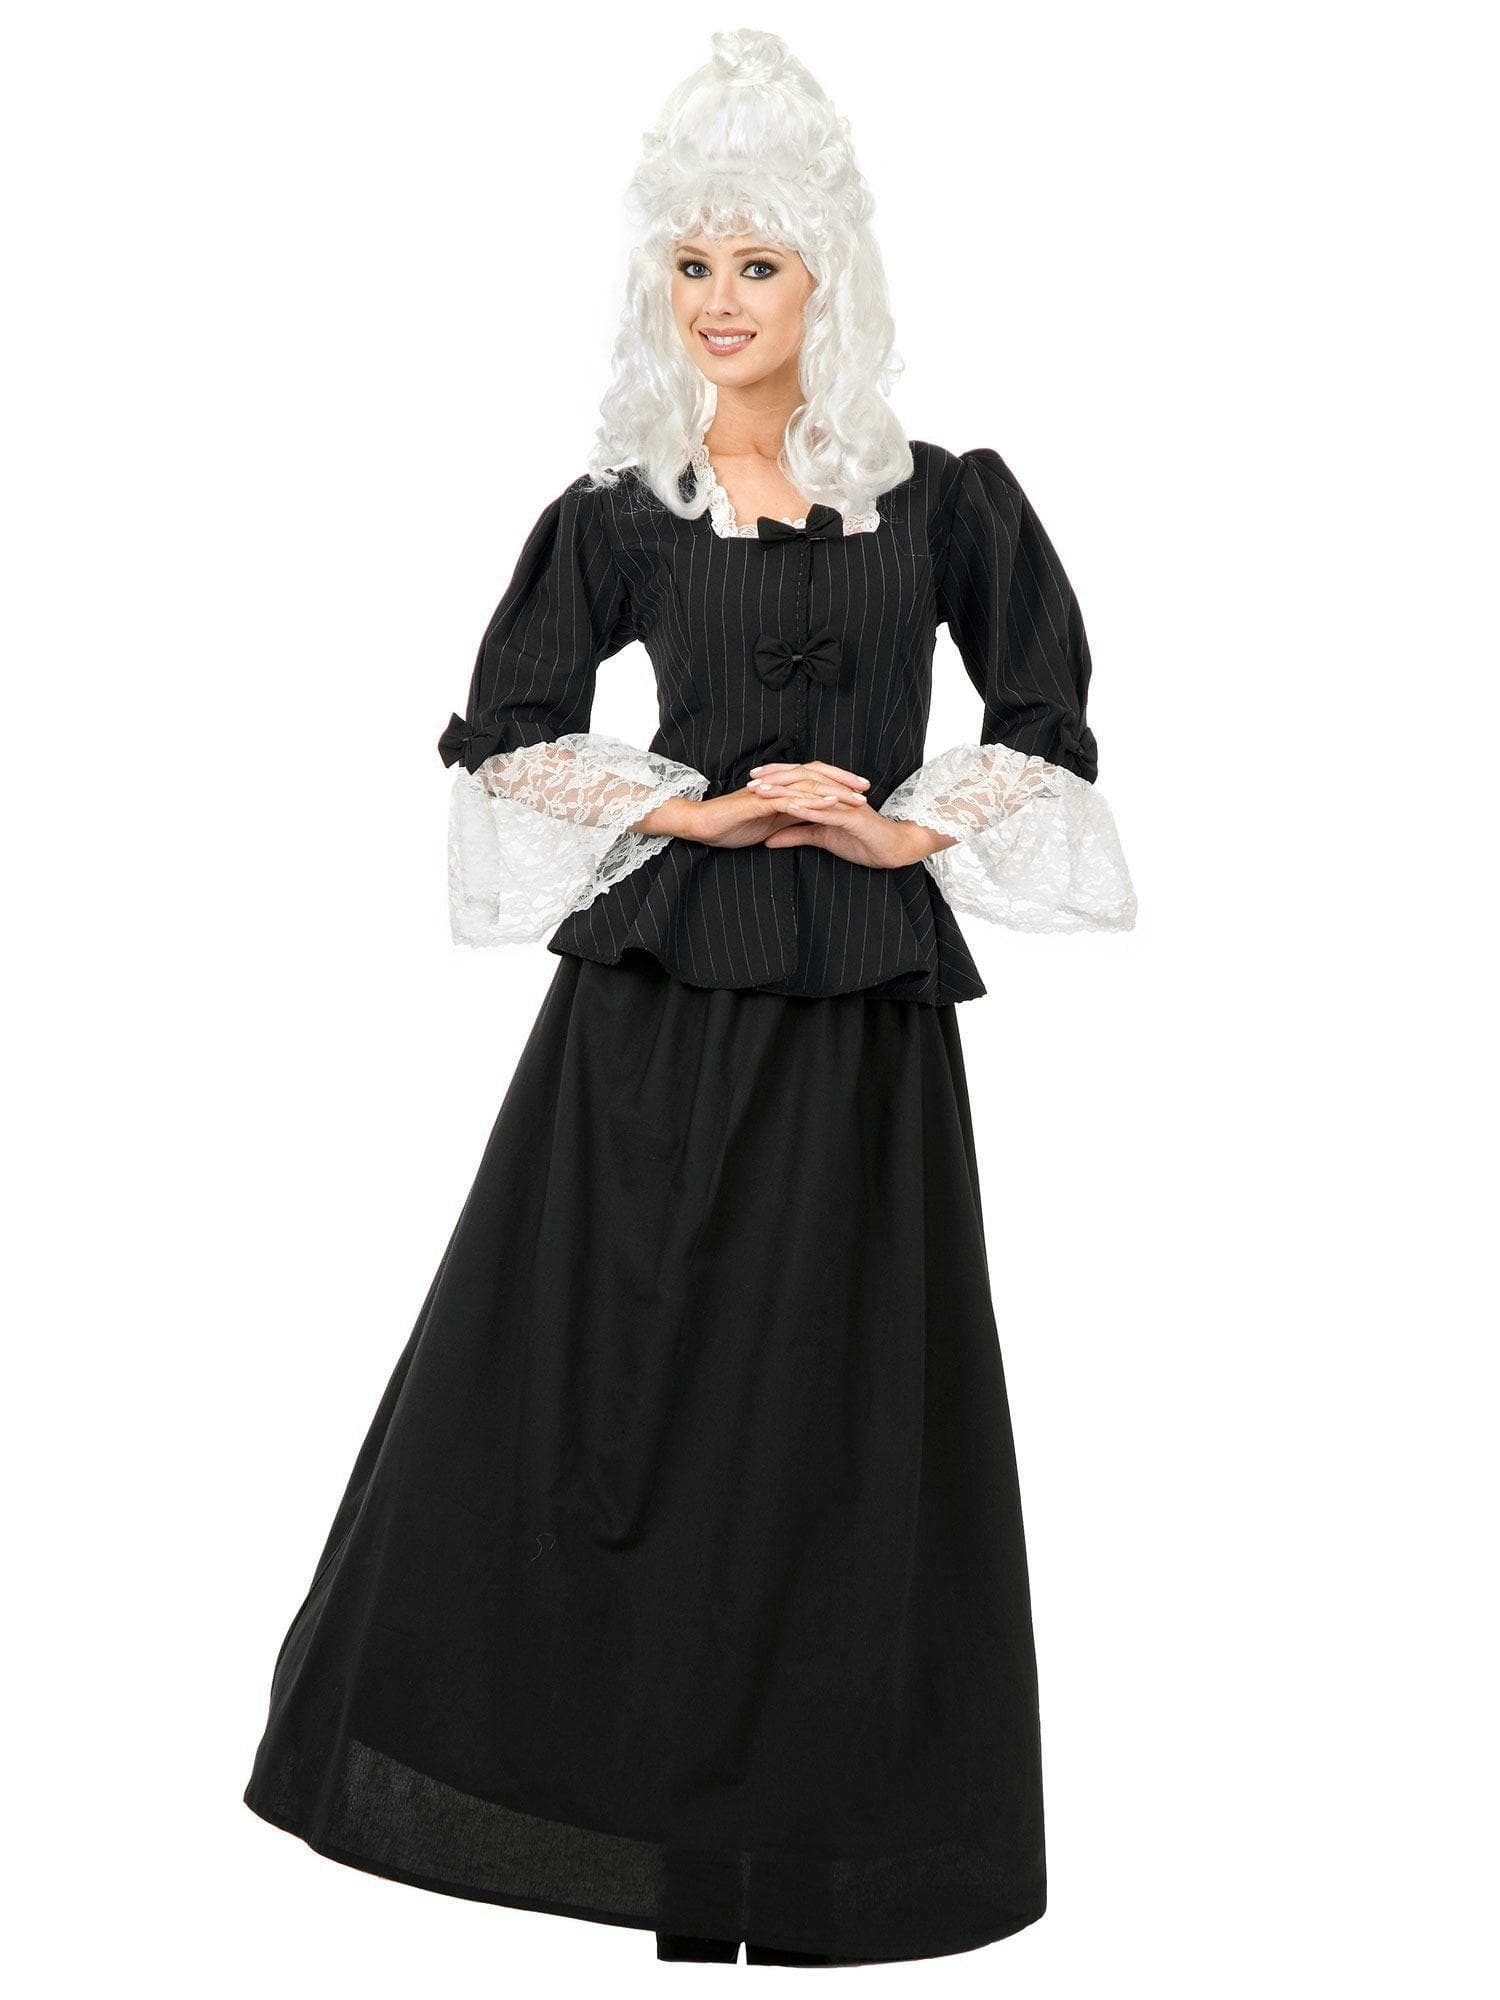 Adult Colonial Woman Costume - costumes.com